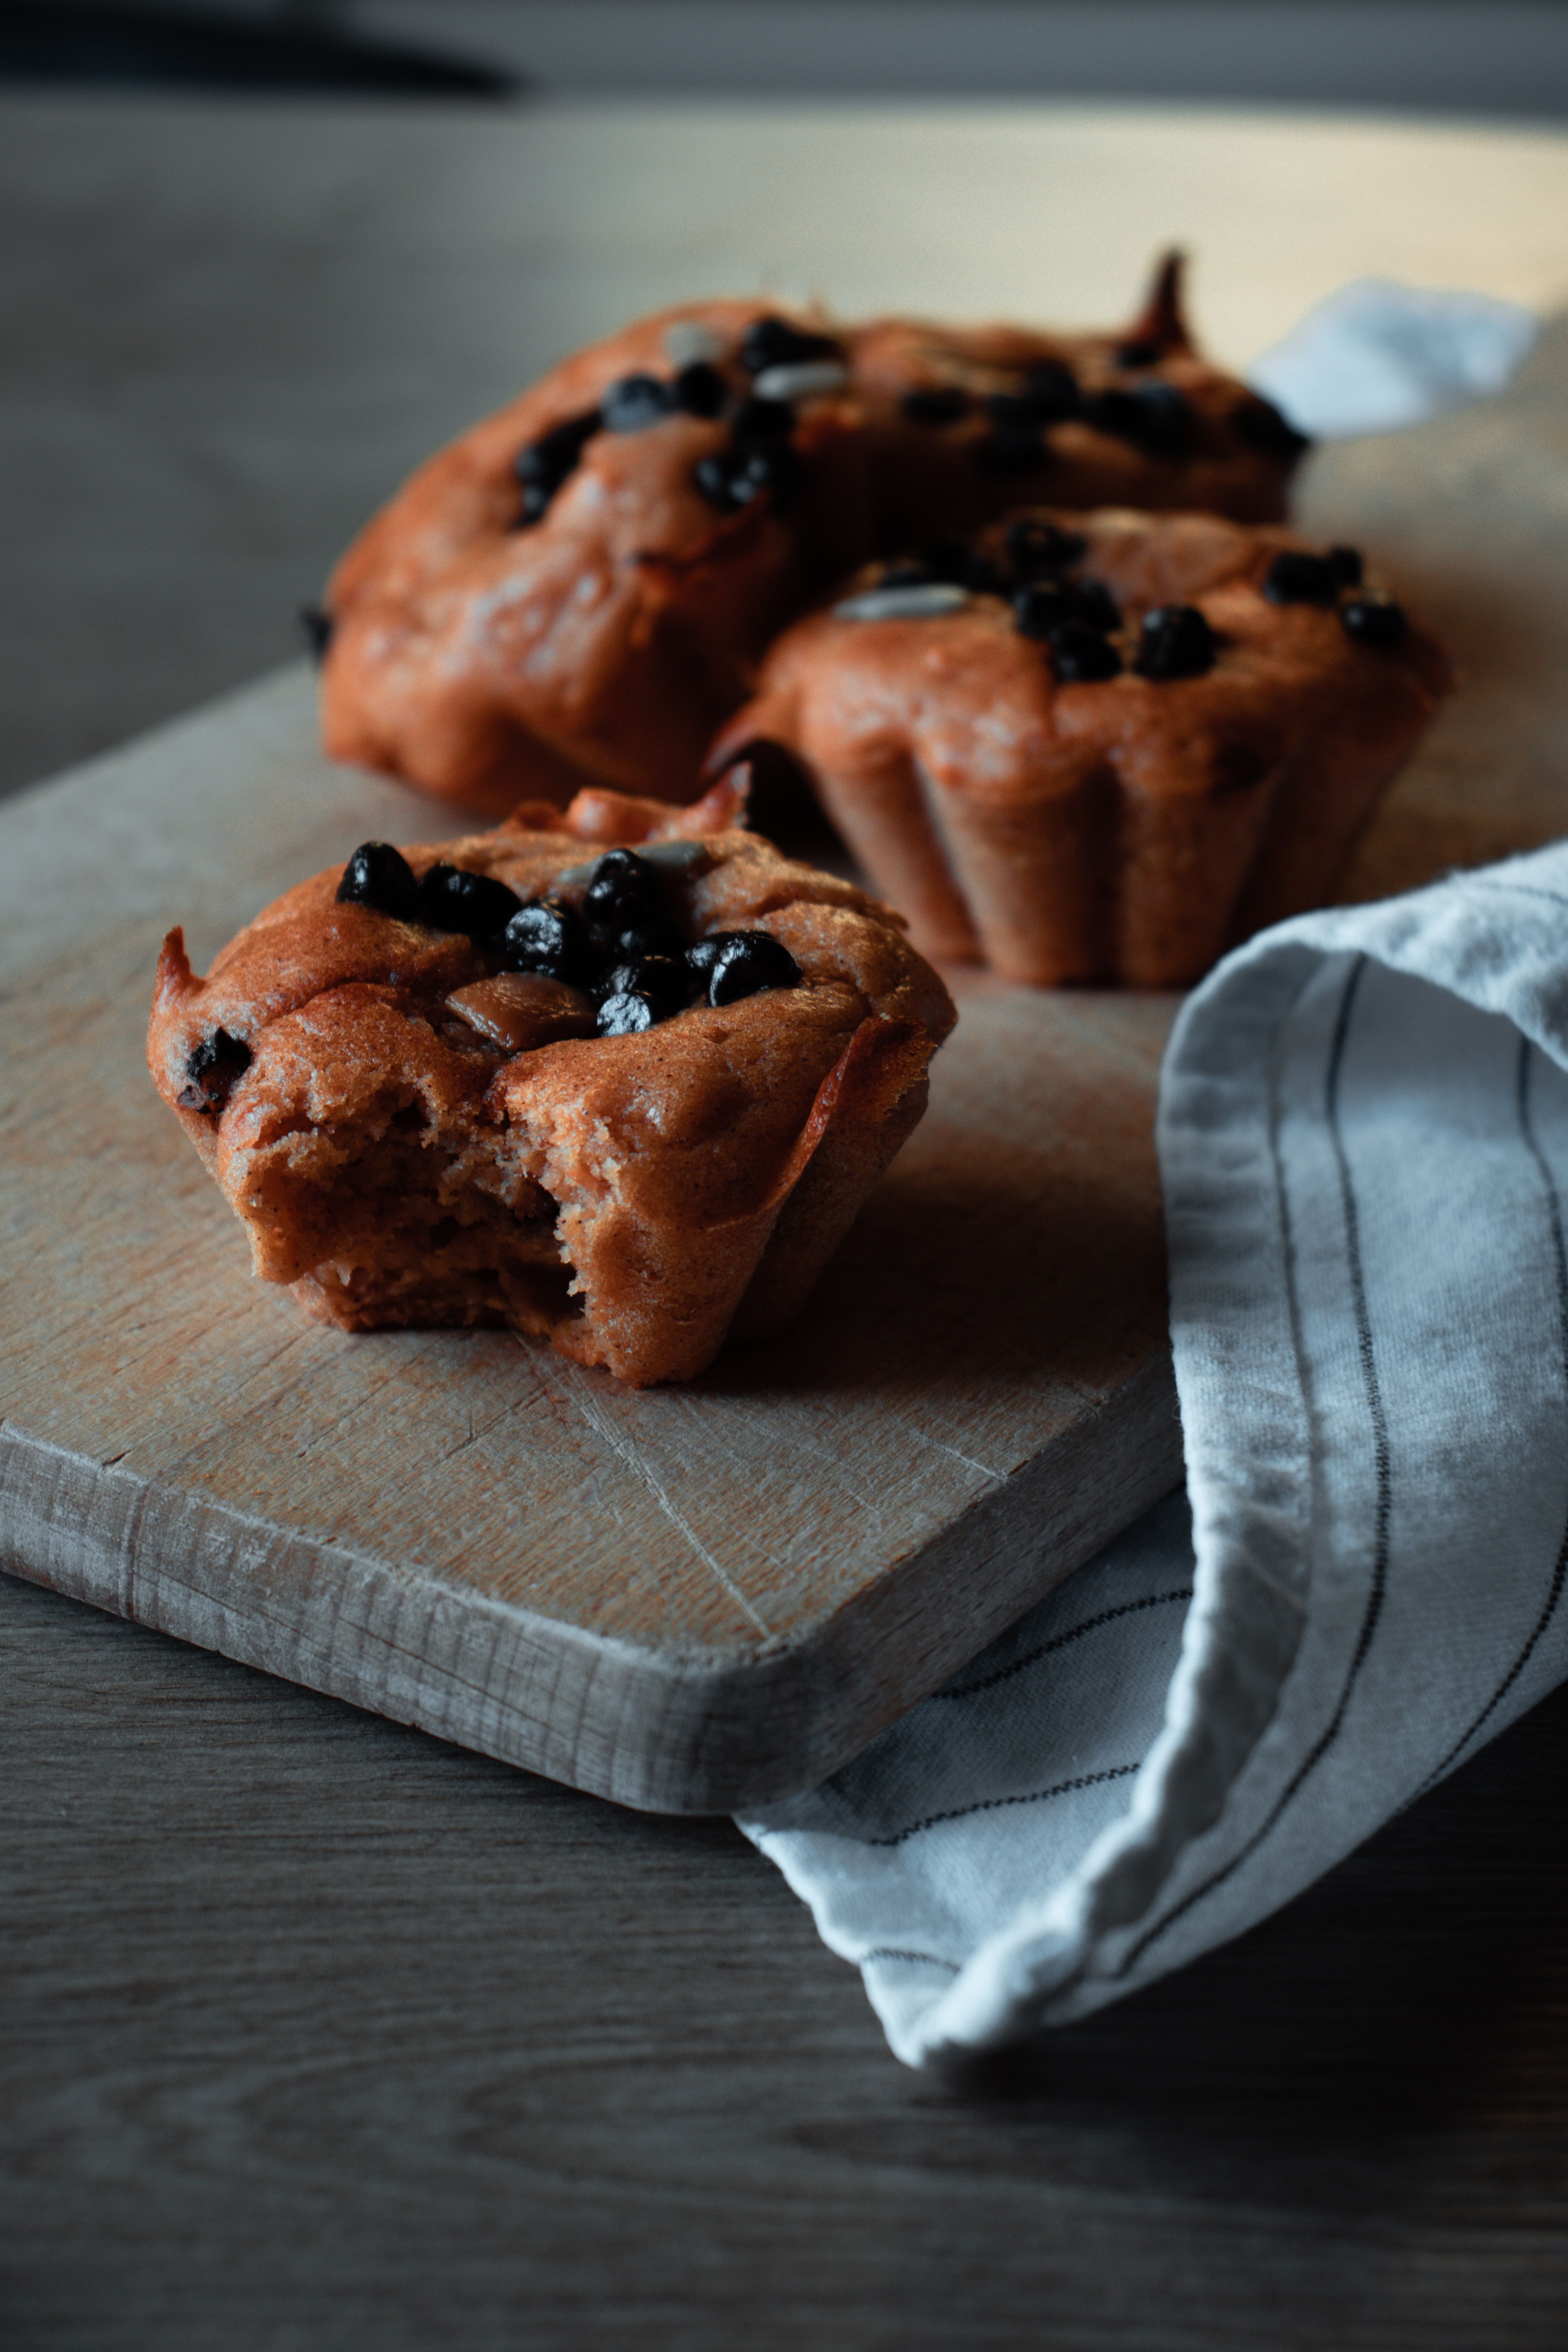 Several Queen Garnet gluten free antioxidant blueberry muffins sitting on a wooden paddle, one with a bite out of the side